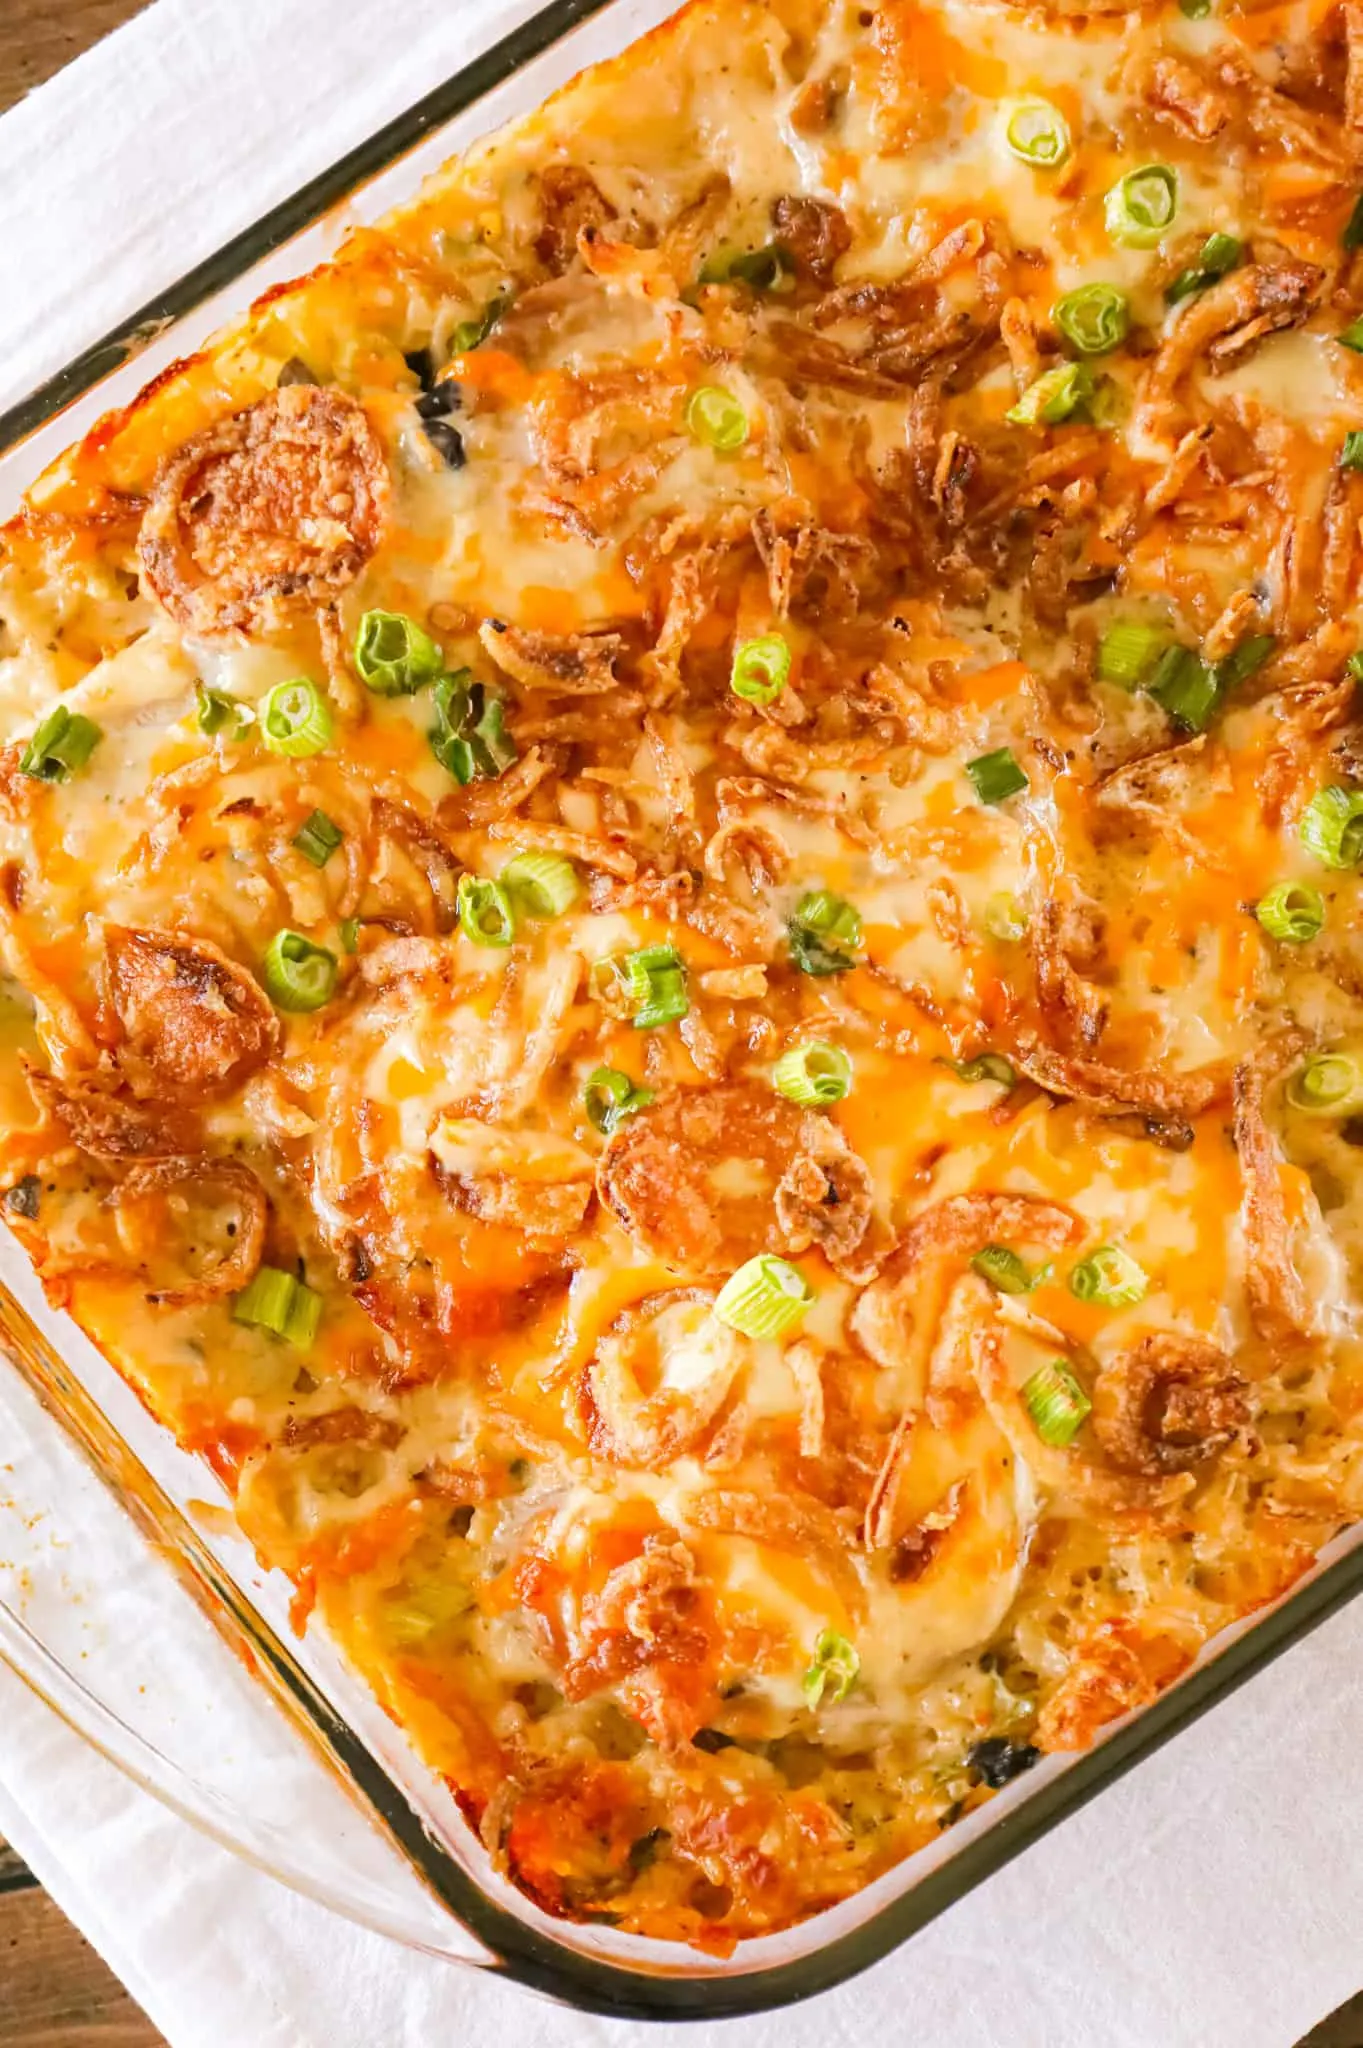 Pork Chop Casserole is a hearty one dish meal with a base of creamy instant rice topped with boneless pork chops, shredded cheese and crispy fried onions.